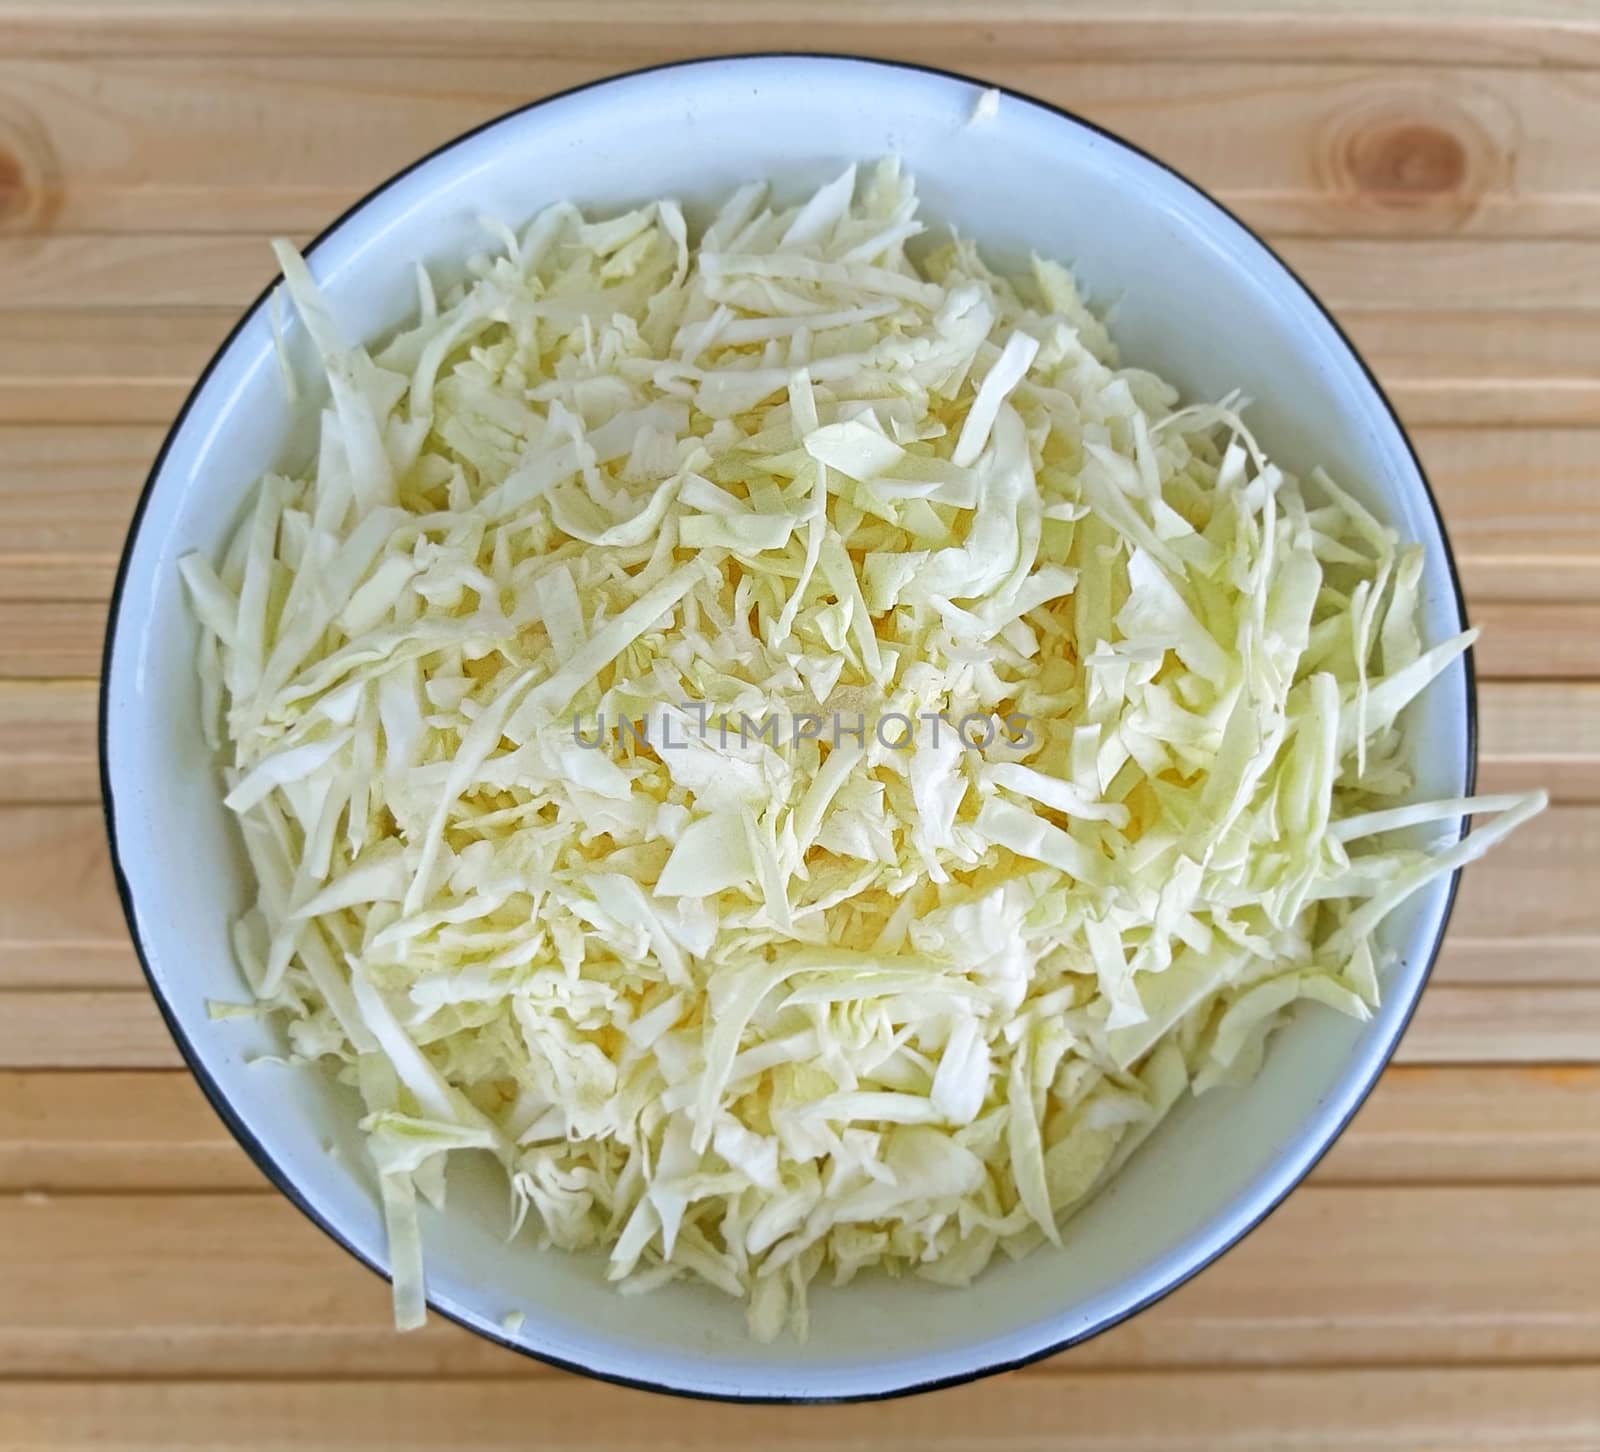 Chopped fresh cabbage in a bowl. Wooden Background.